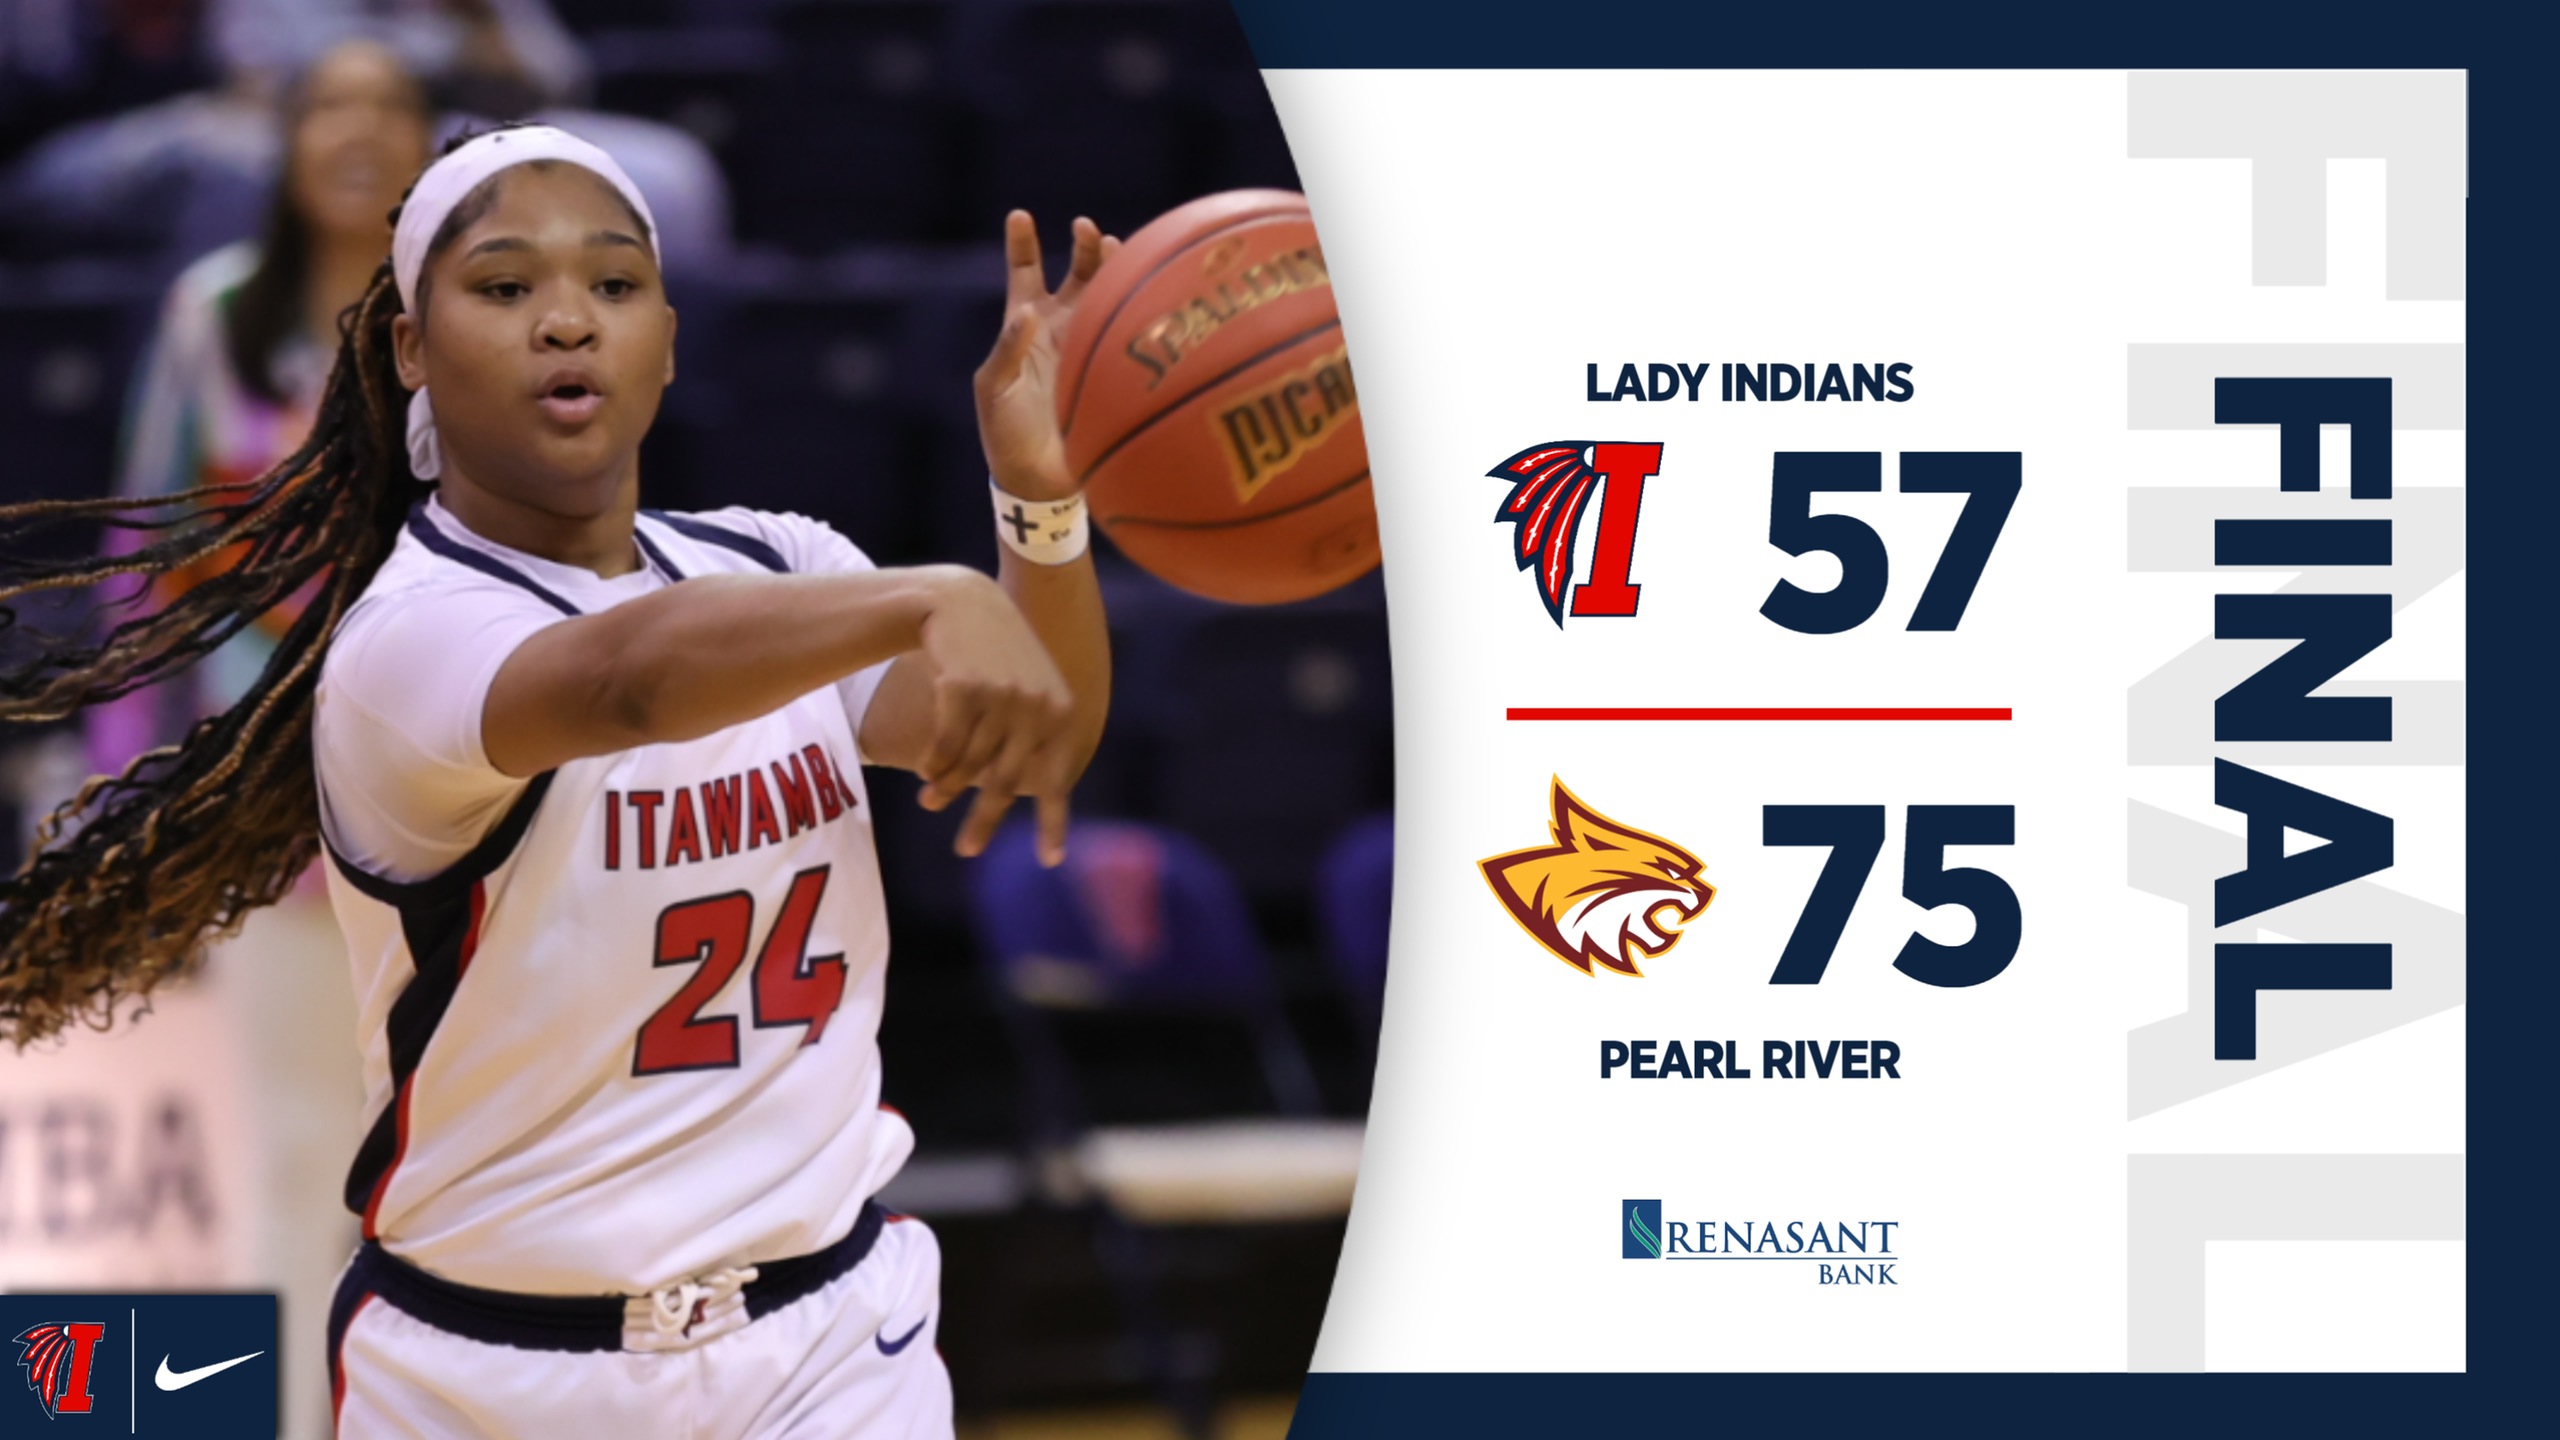 Lady Indians suffer first loss of the season against No. 7 Pearl River